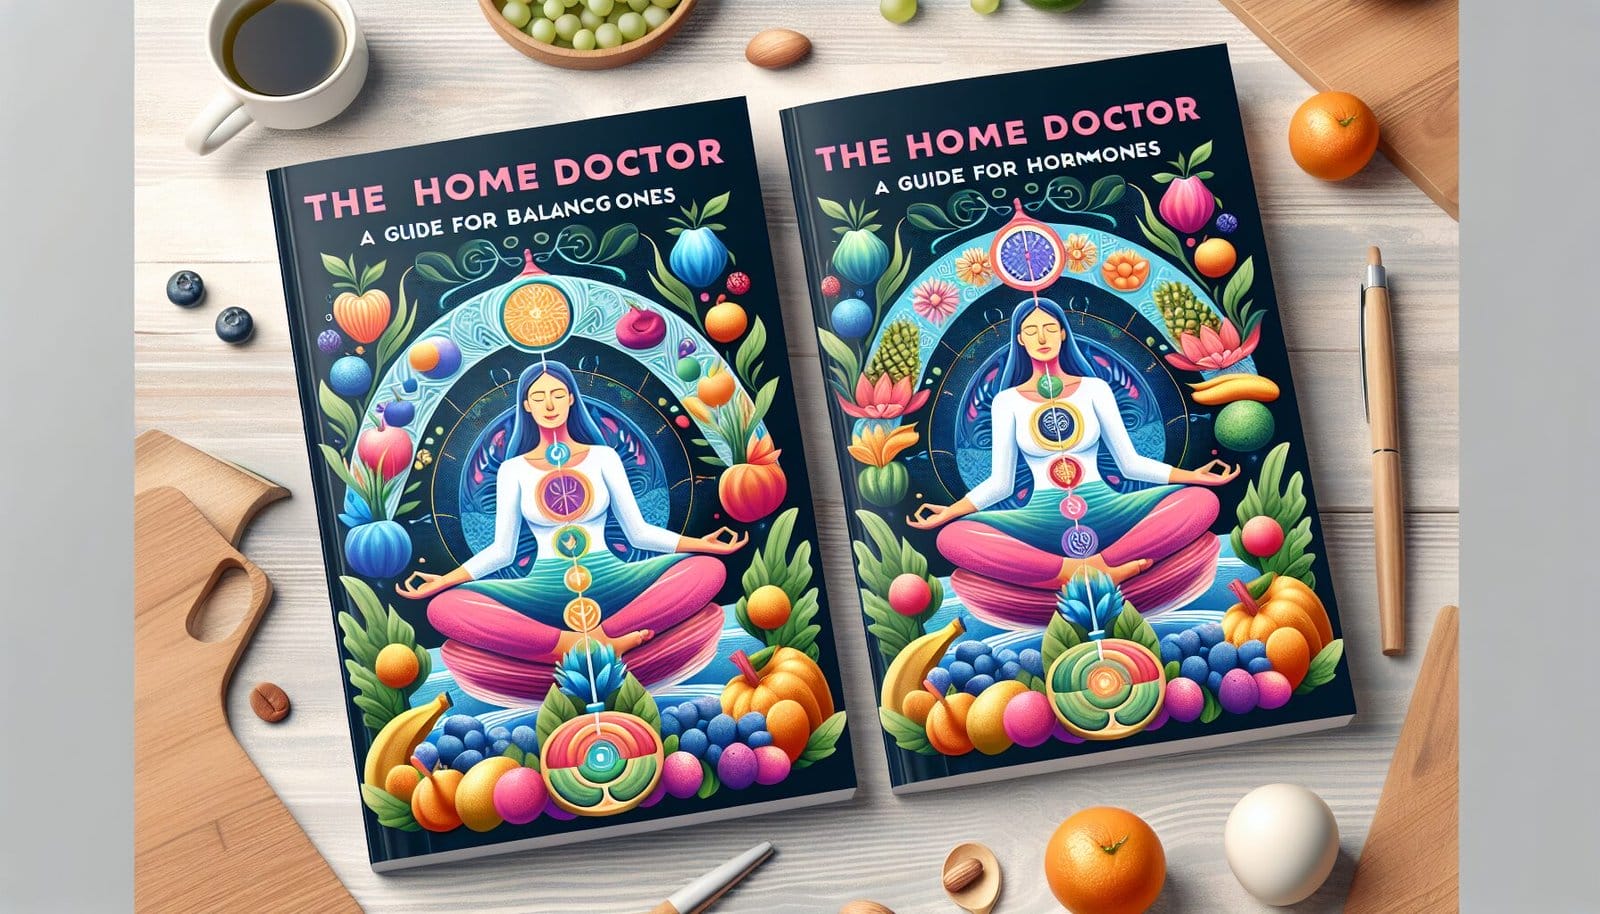 You are currently viewing The Home Doctor: A Guide for Balancing Hormones